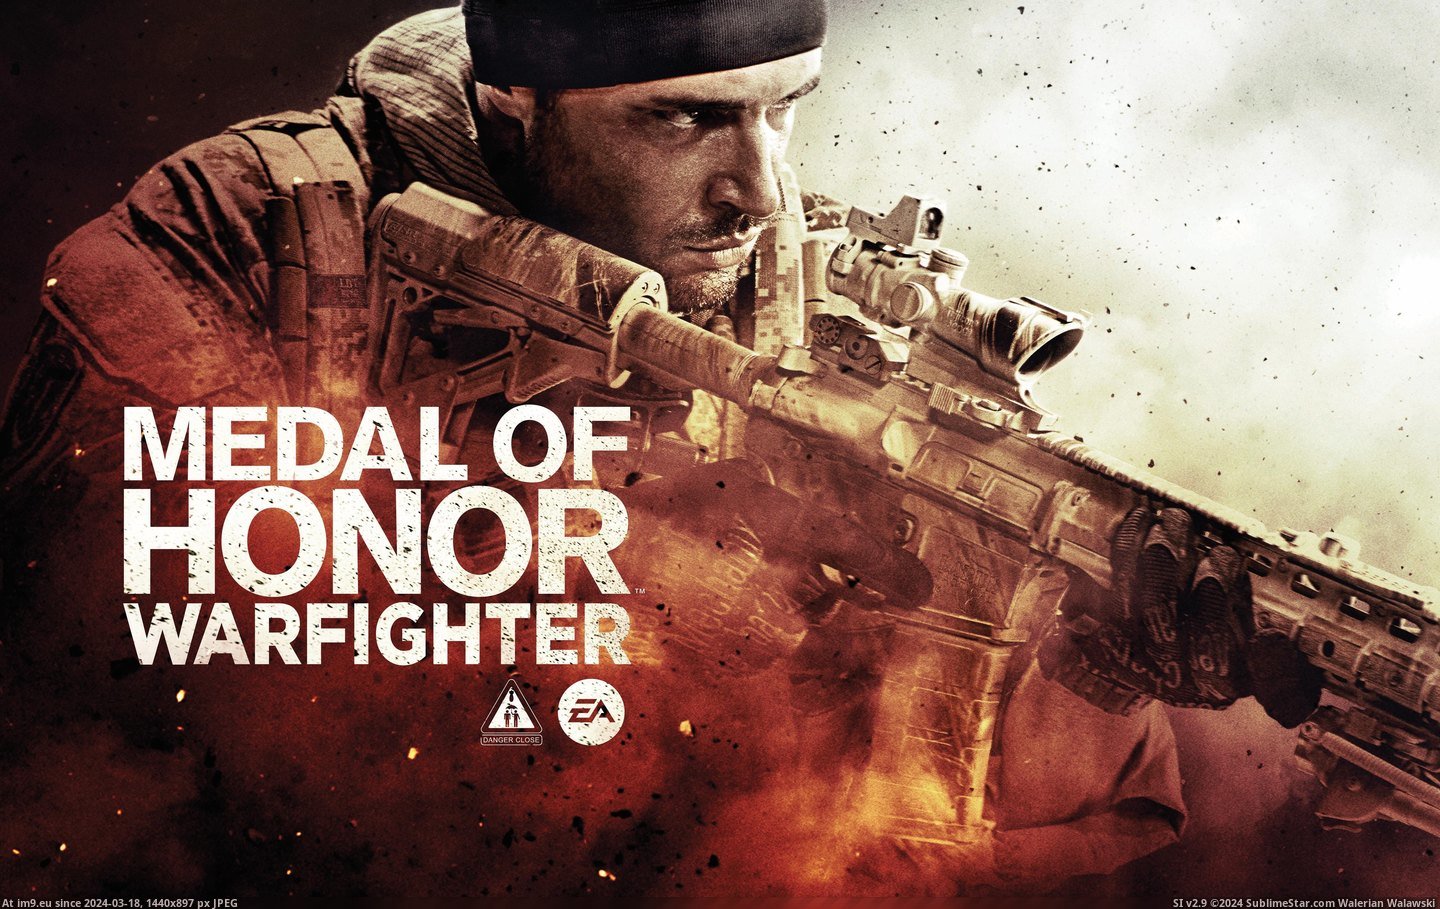 #Wallpaper #Wide #Warfighter #Honor #Medal Medal Of Honor Warfighter Wide HD Wallpaper Pic. (Image of album Unique HD Wallpapers))